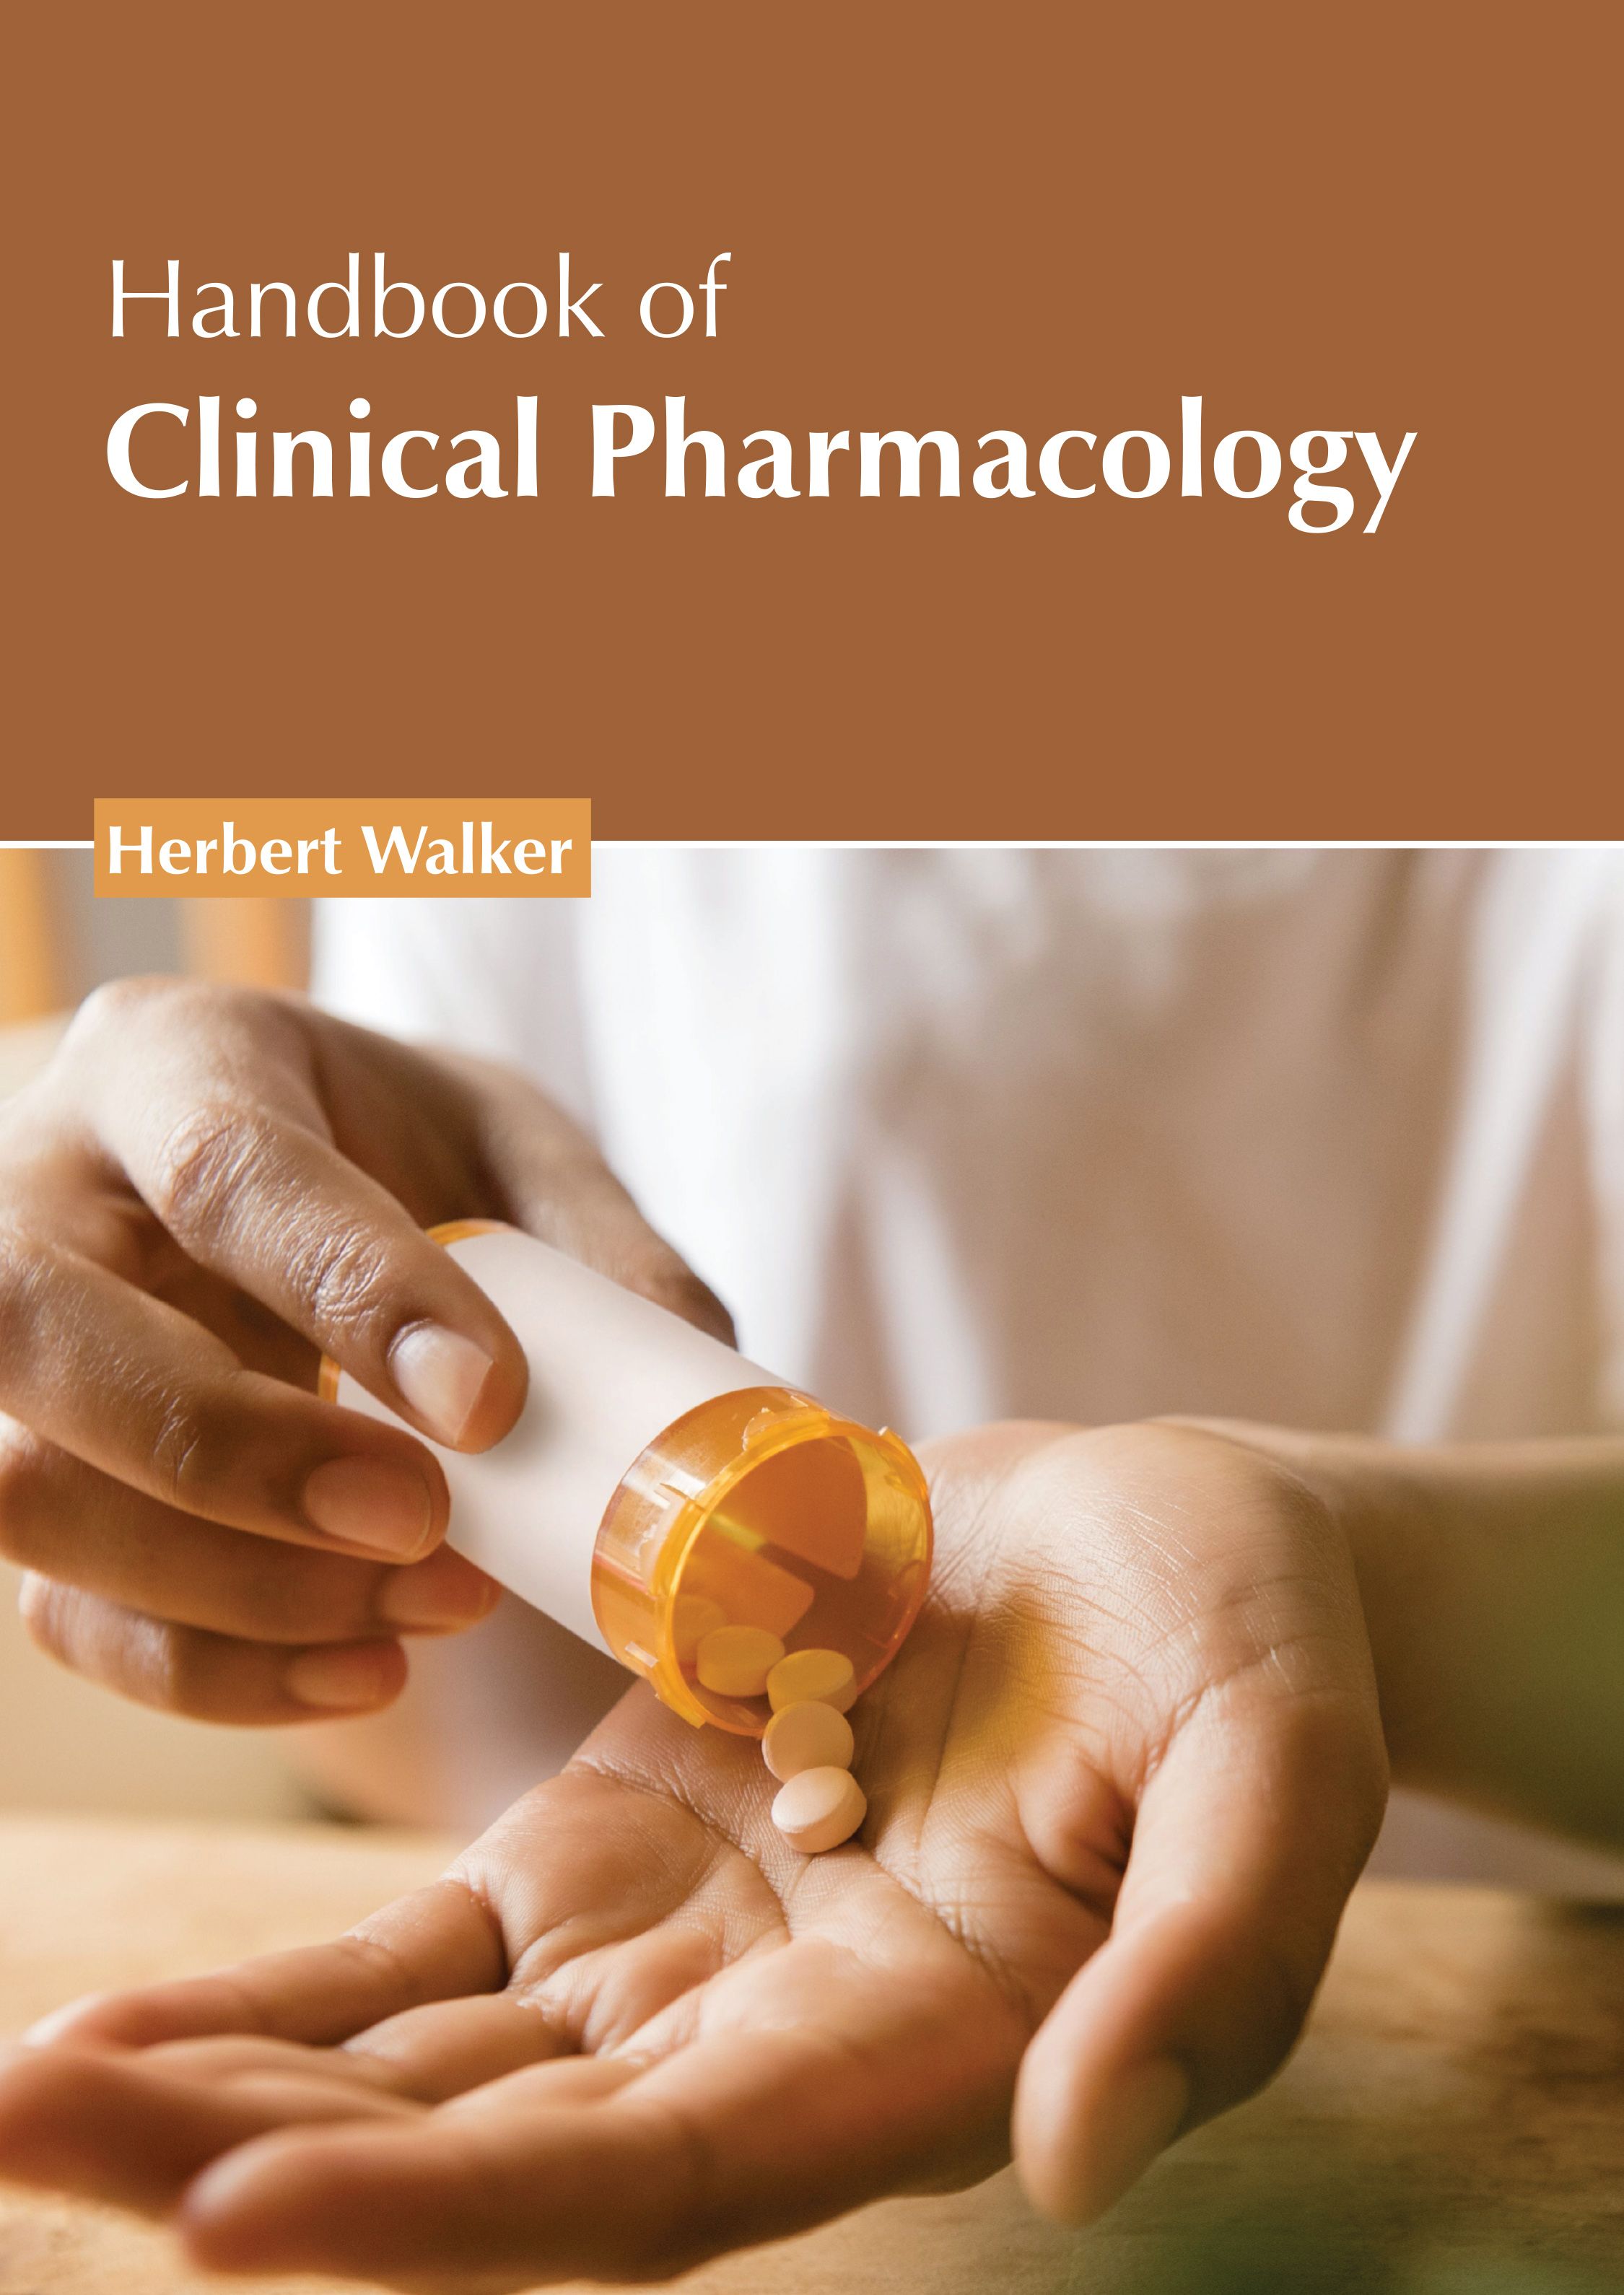 

exclusive-publishers/american-medical-publishers/handbook-of-clinical-pharmacology-9798887401423